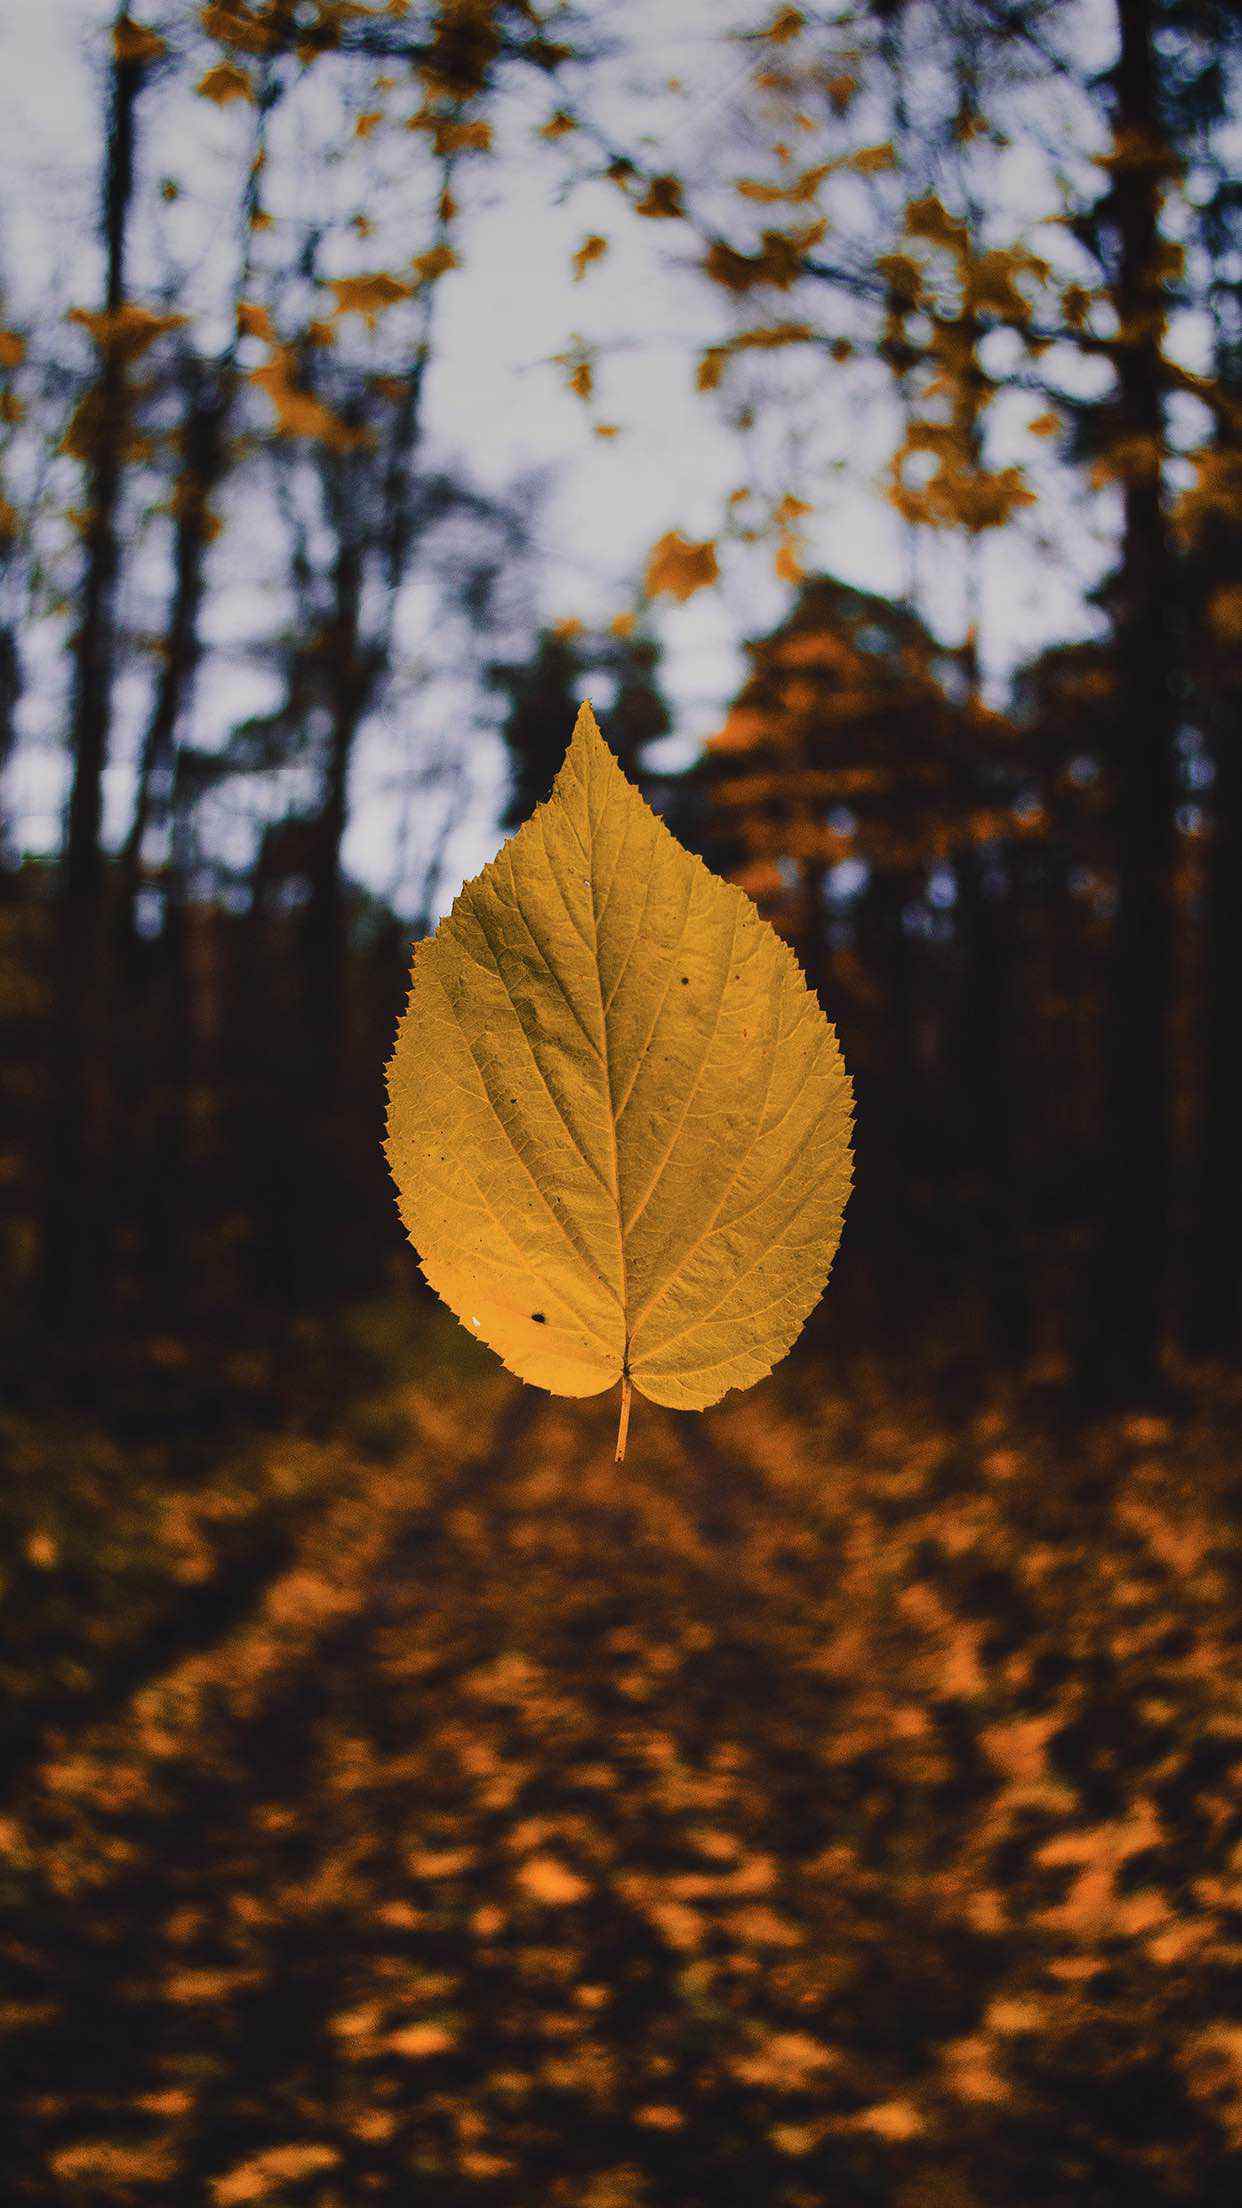 Iphone X Autumn Image Wallpapers